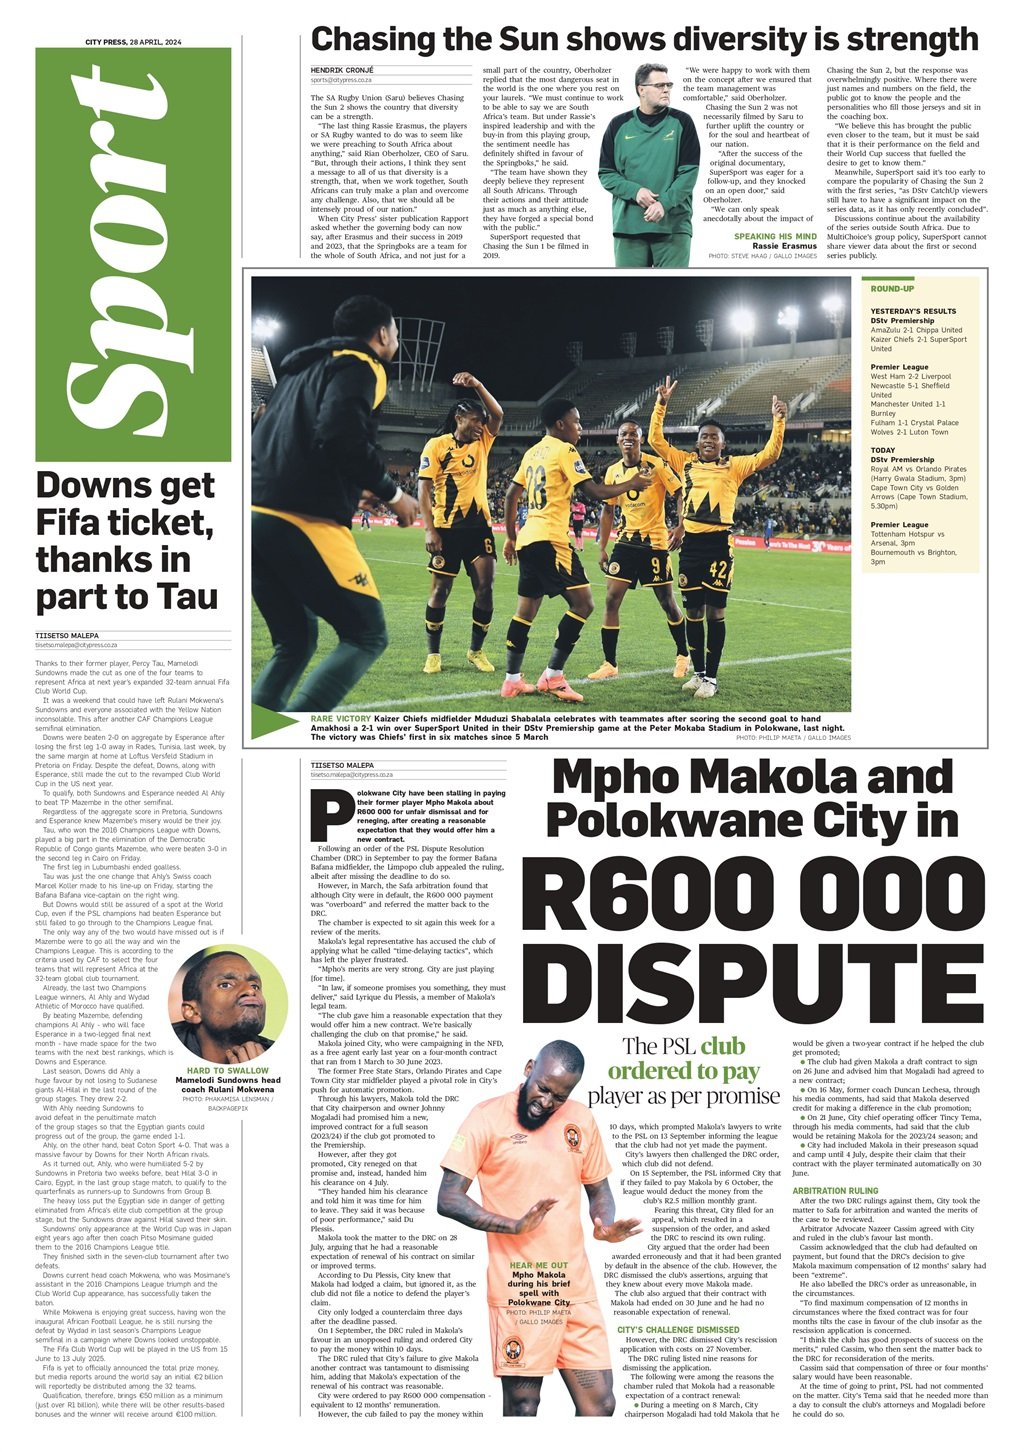 What's in City Press Sport, 28 April